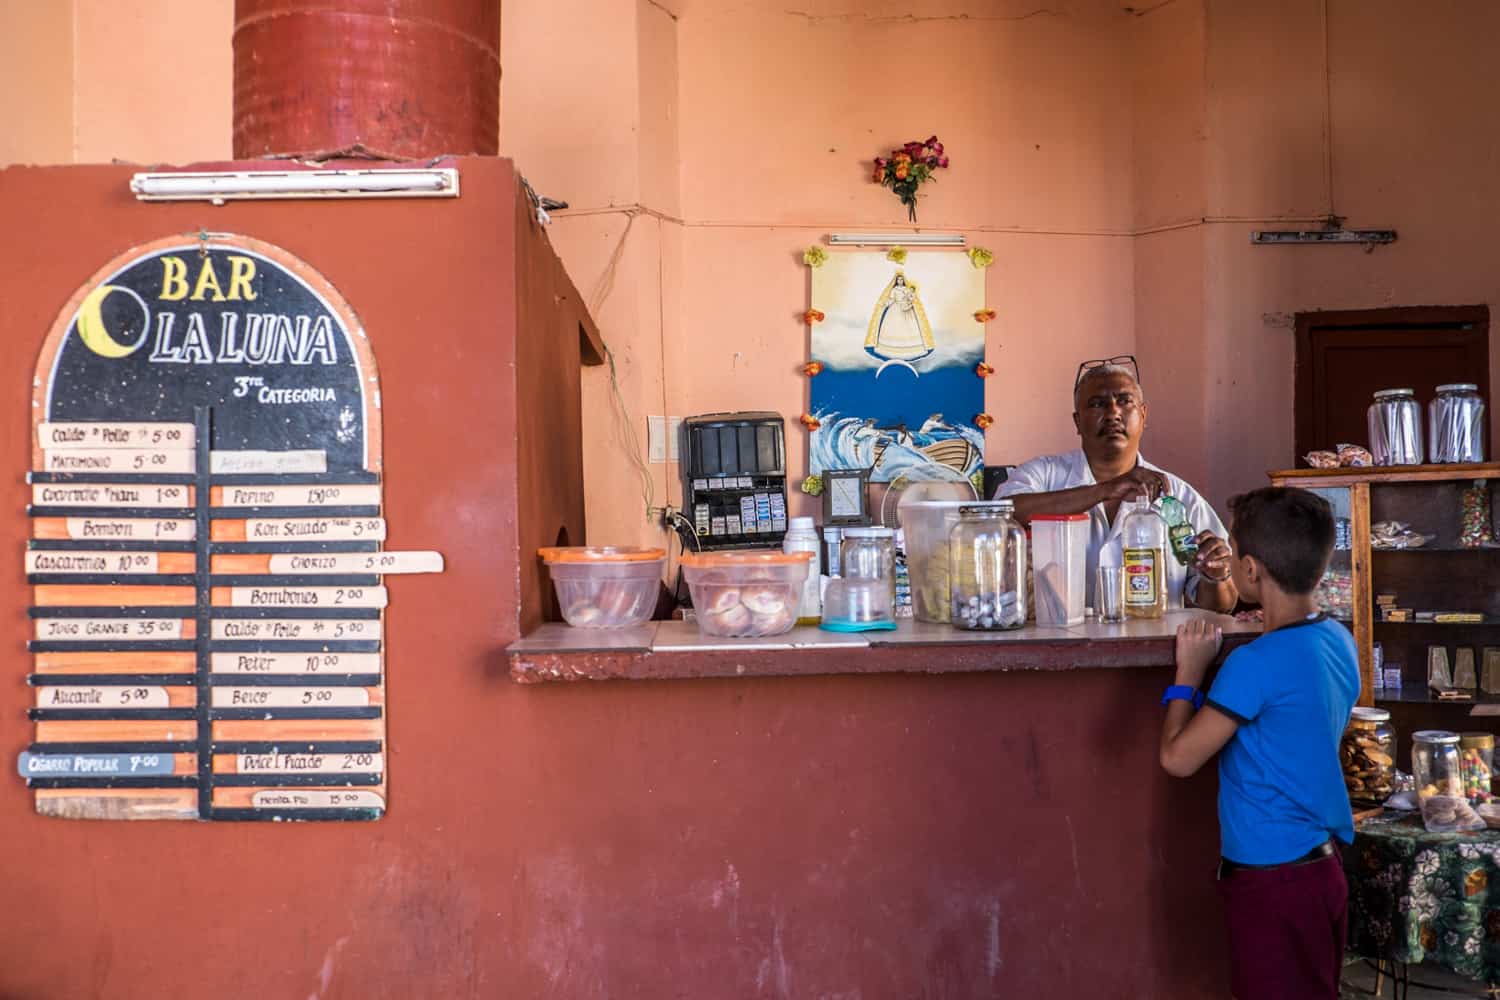 A man serves a young boy in a ochre orange painted snack bar in Cuba. The sign reads: Bar La Luna. 